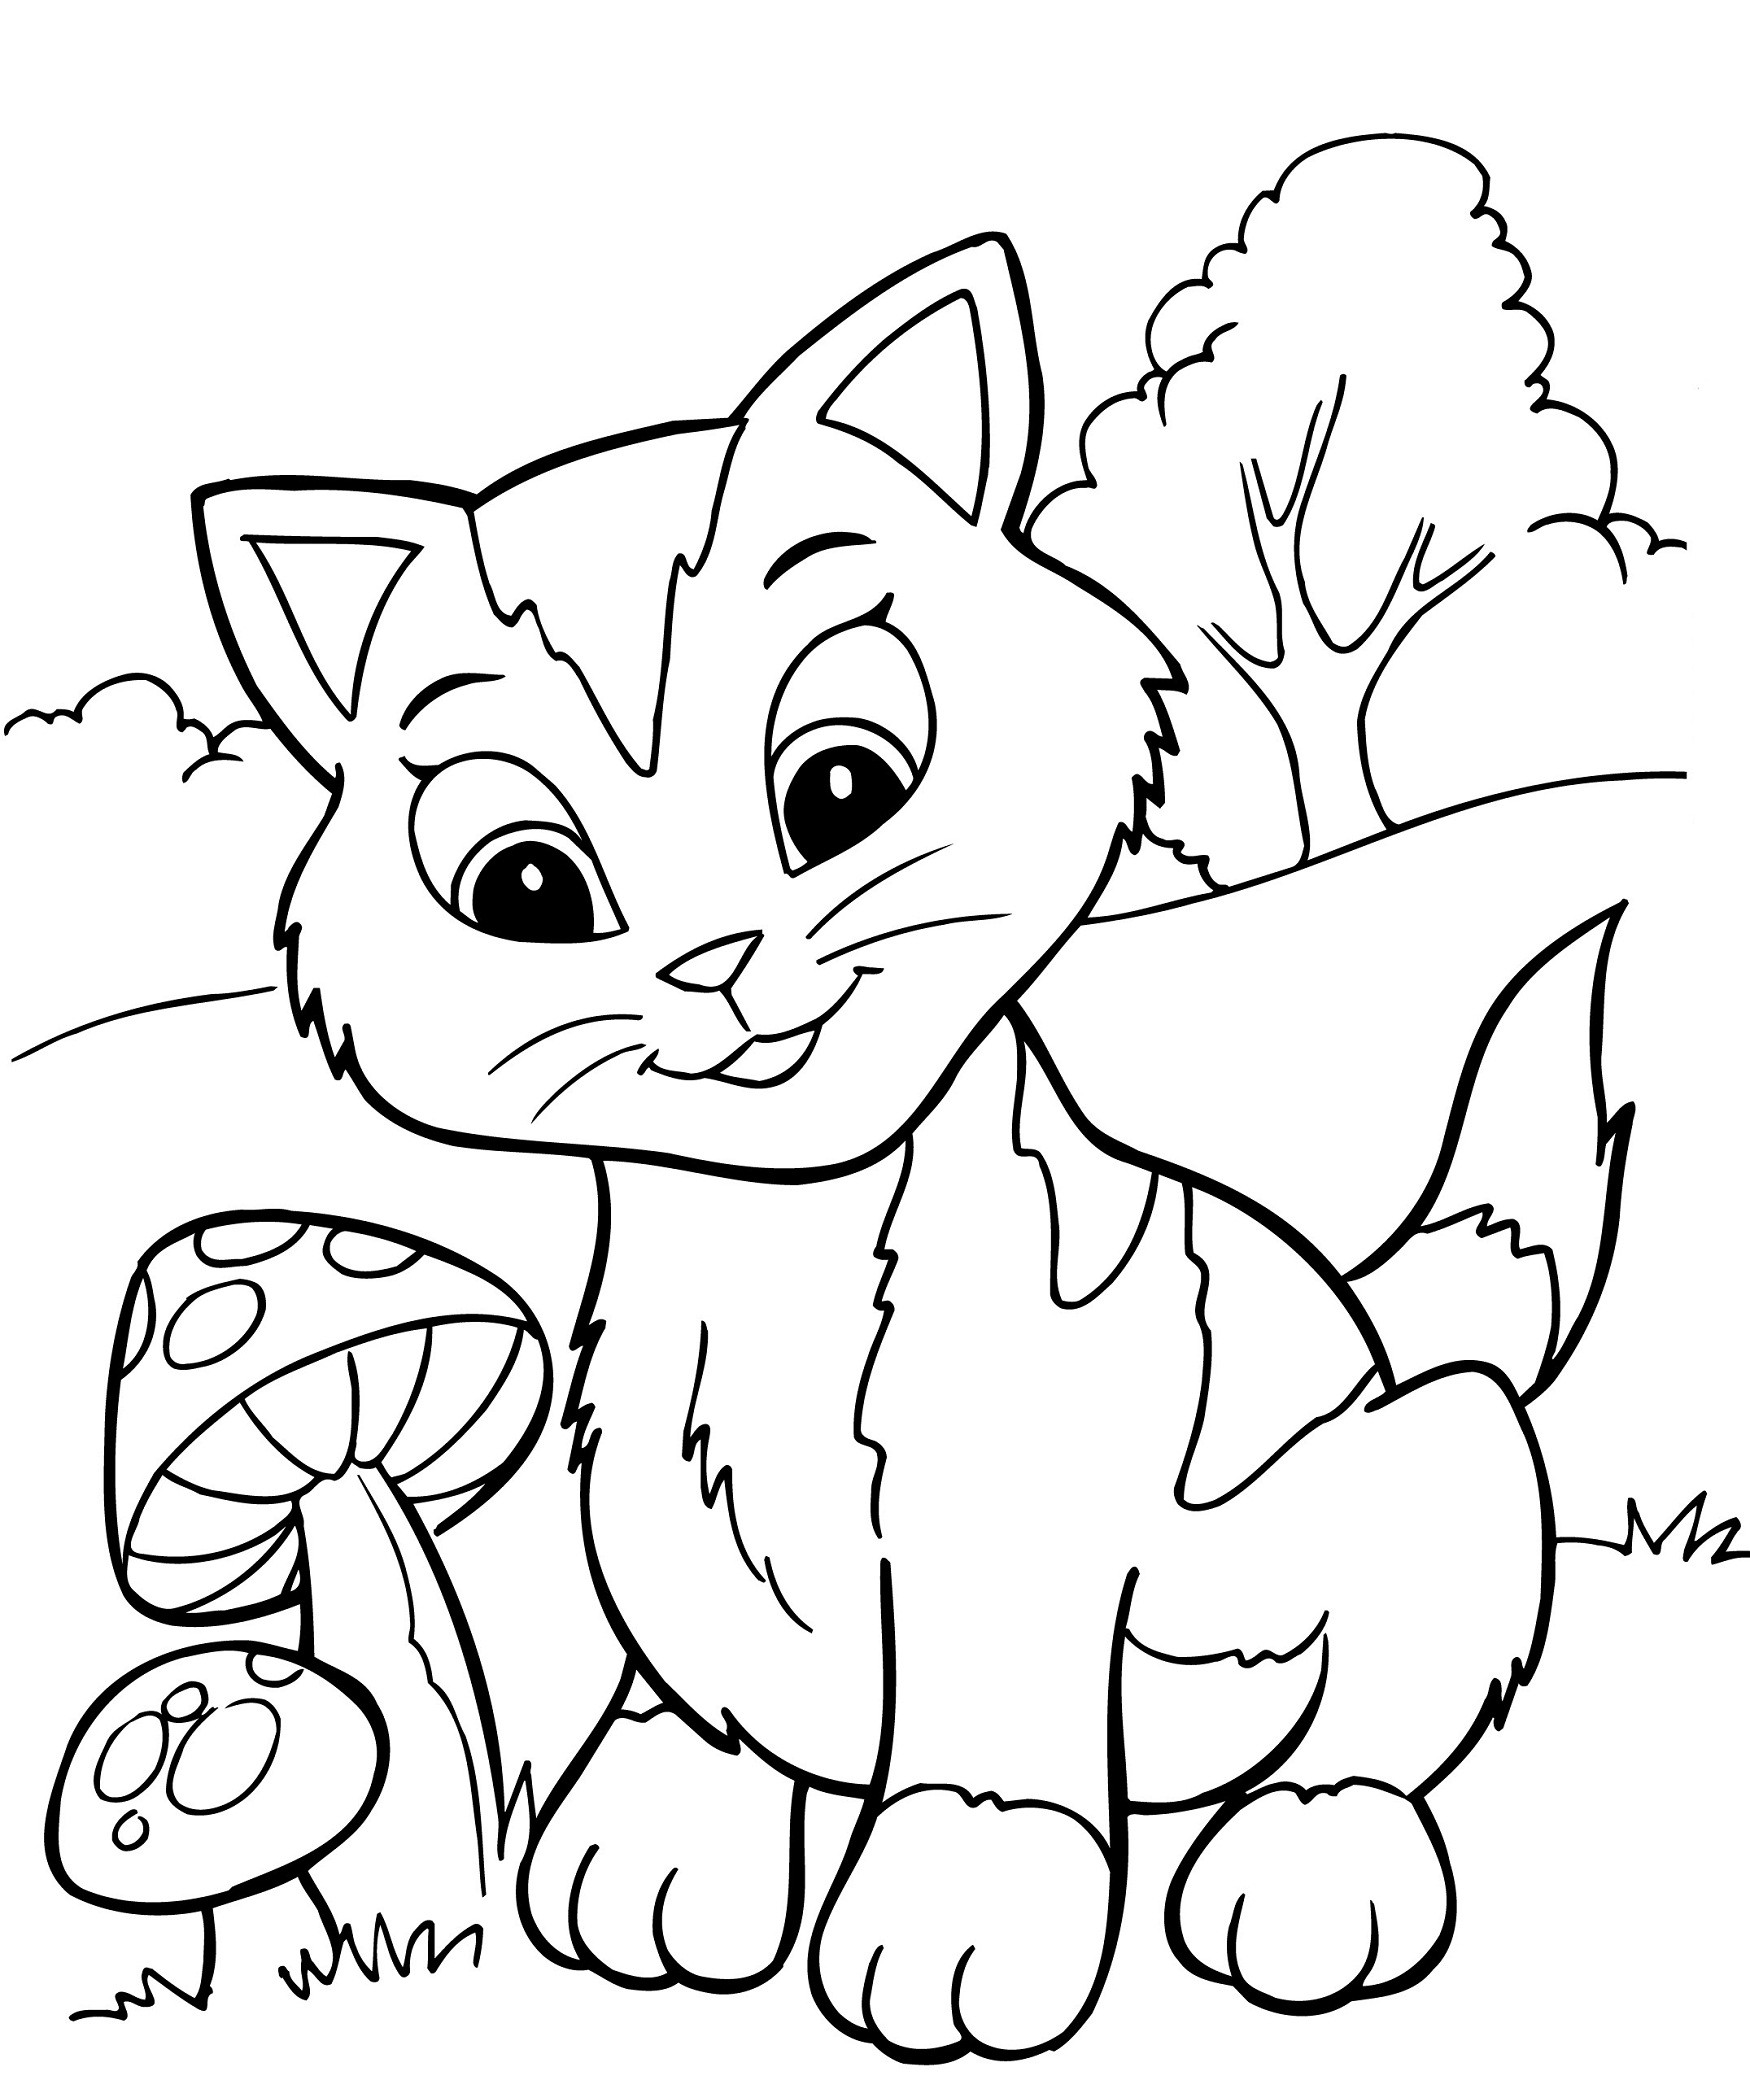 Coloring Pages For Toddlers Pdf
 Printable Coloring Book Pages for Kids Gallery